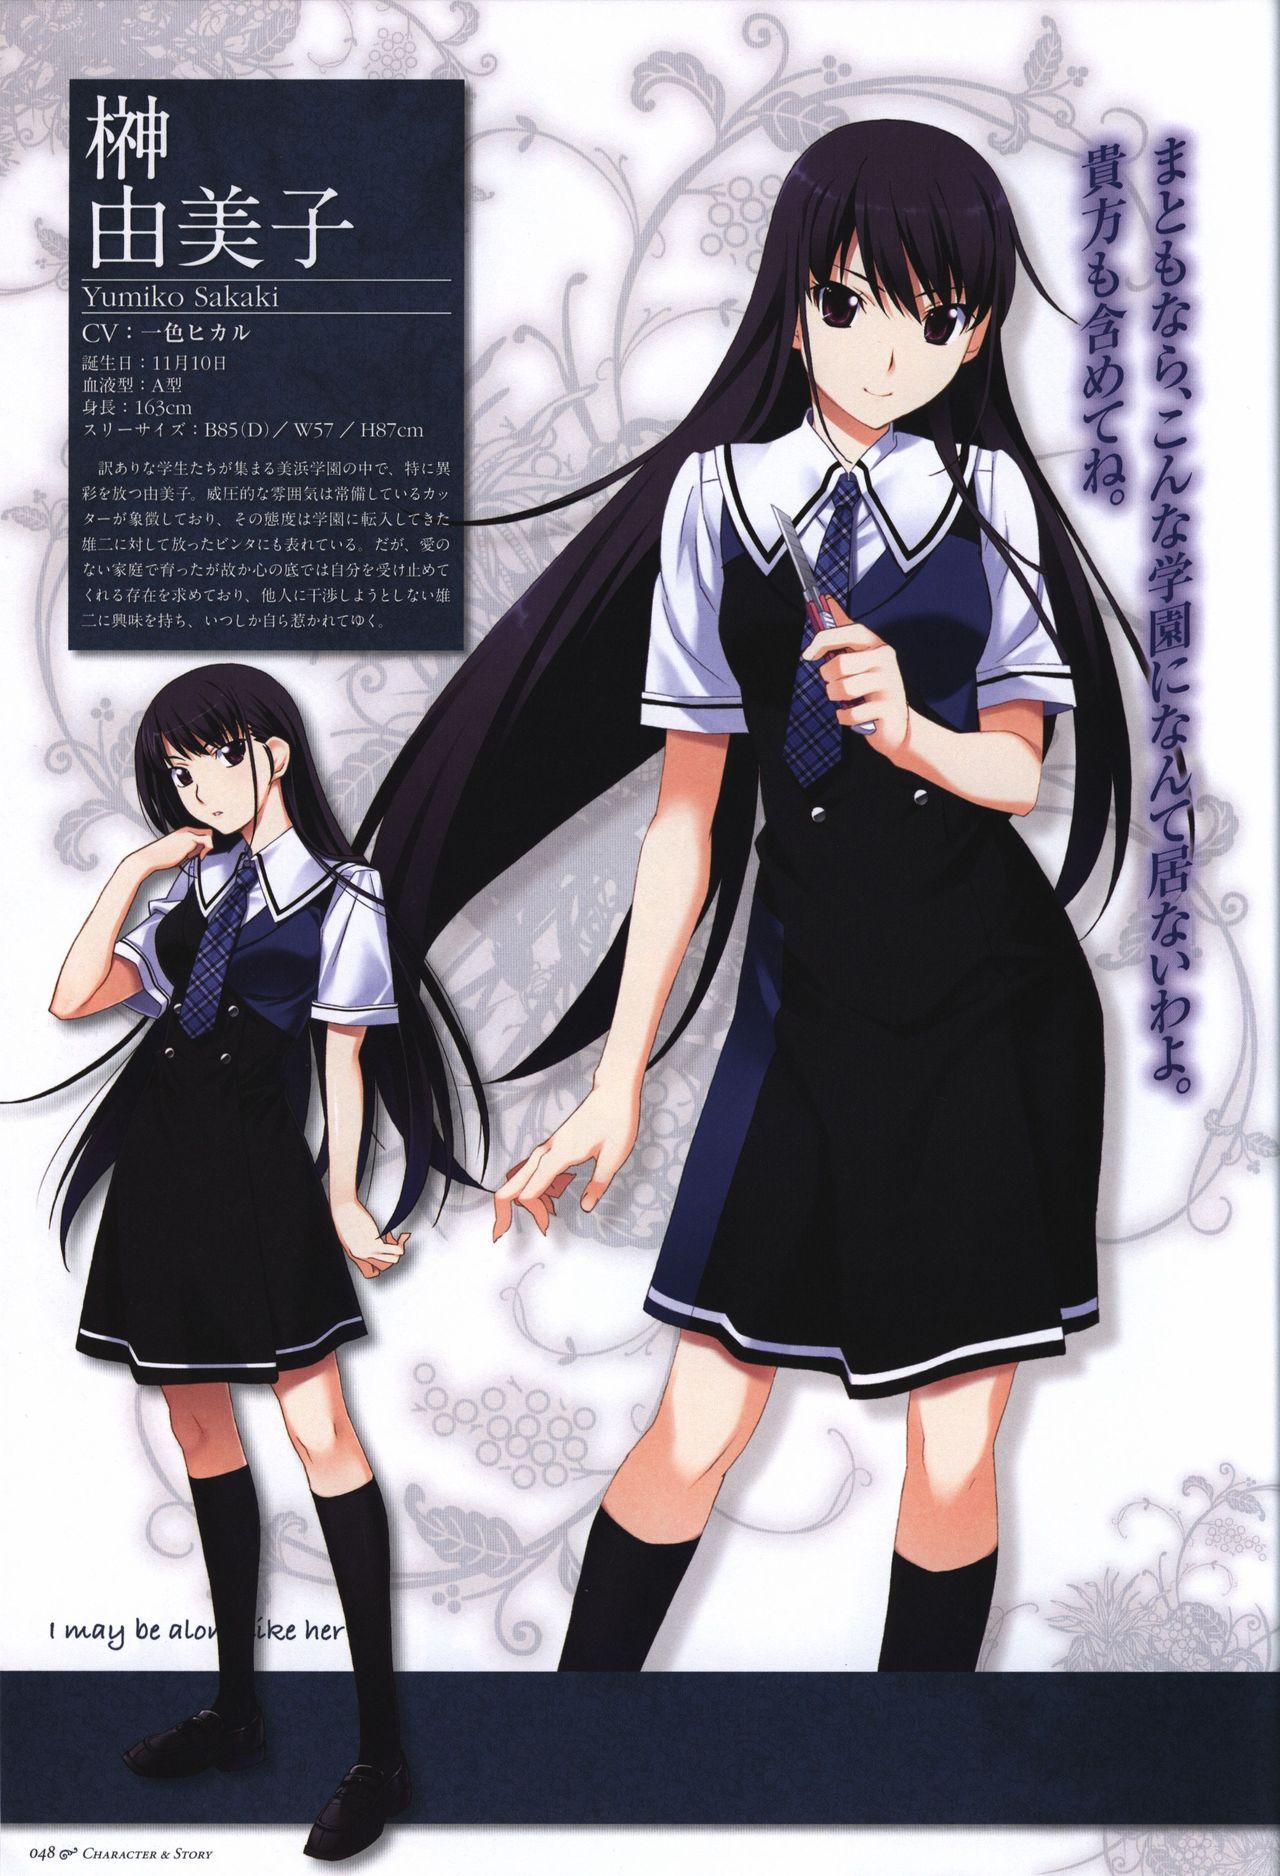 The Fruit of Grisaia Visual FanBook 48